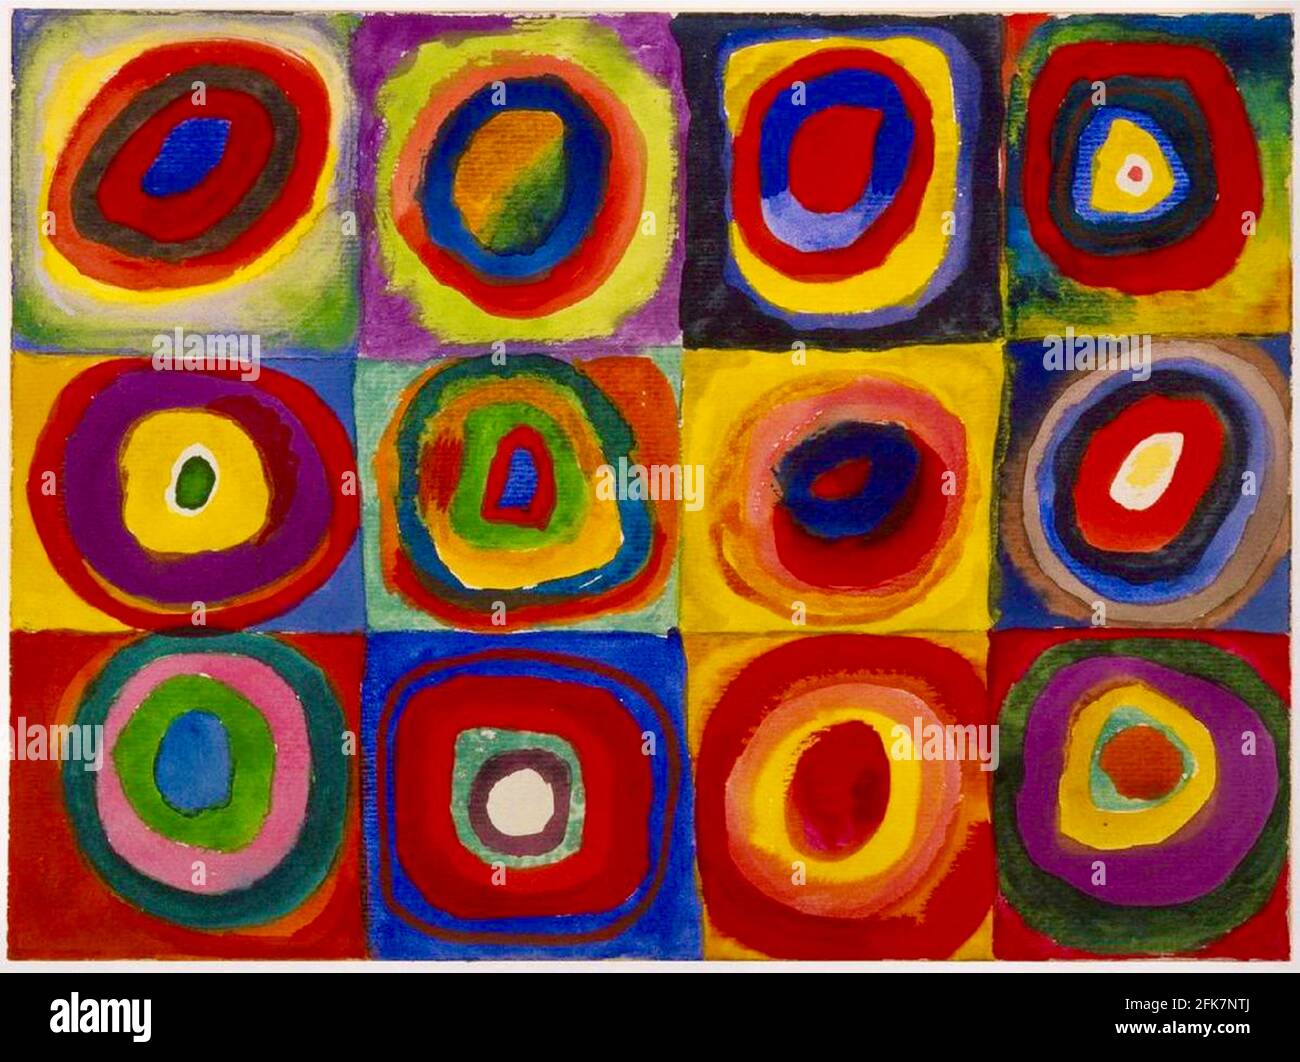 Kandinsky artwork entitled Squares with Concentric Circles. Stock Photo